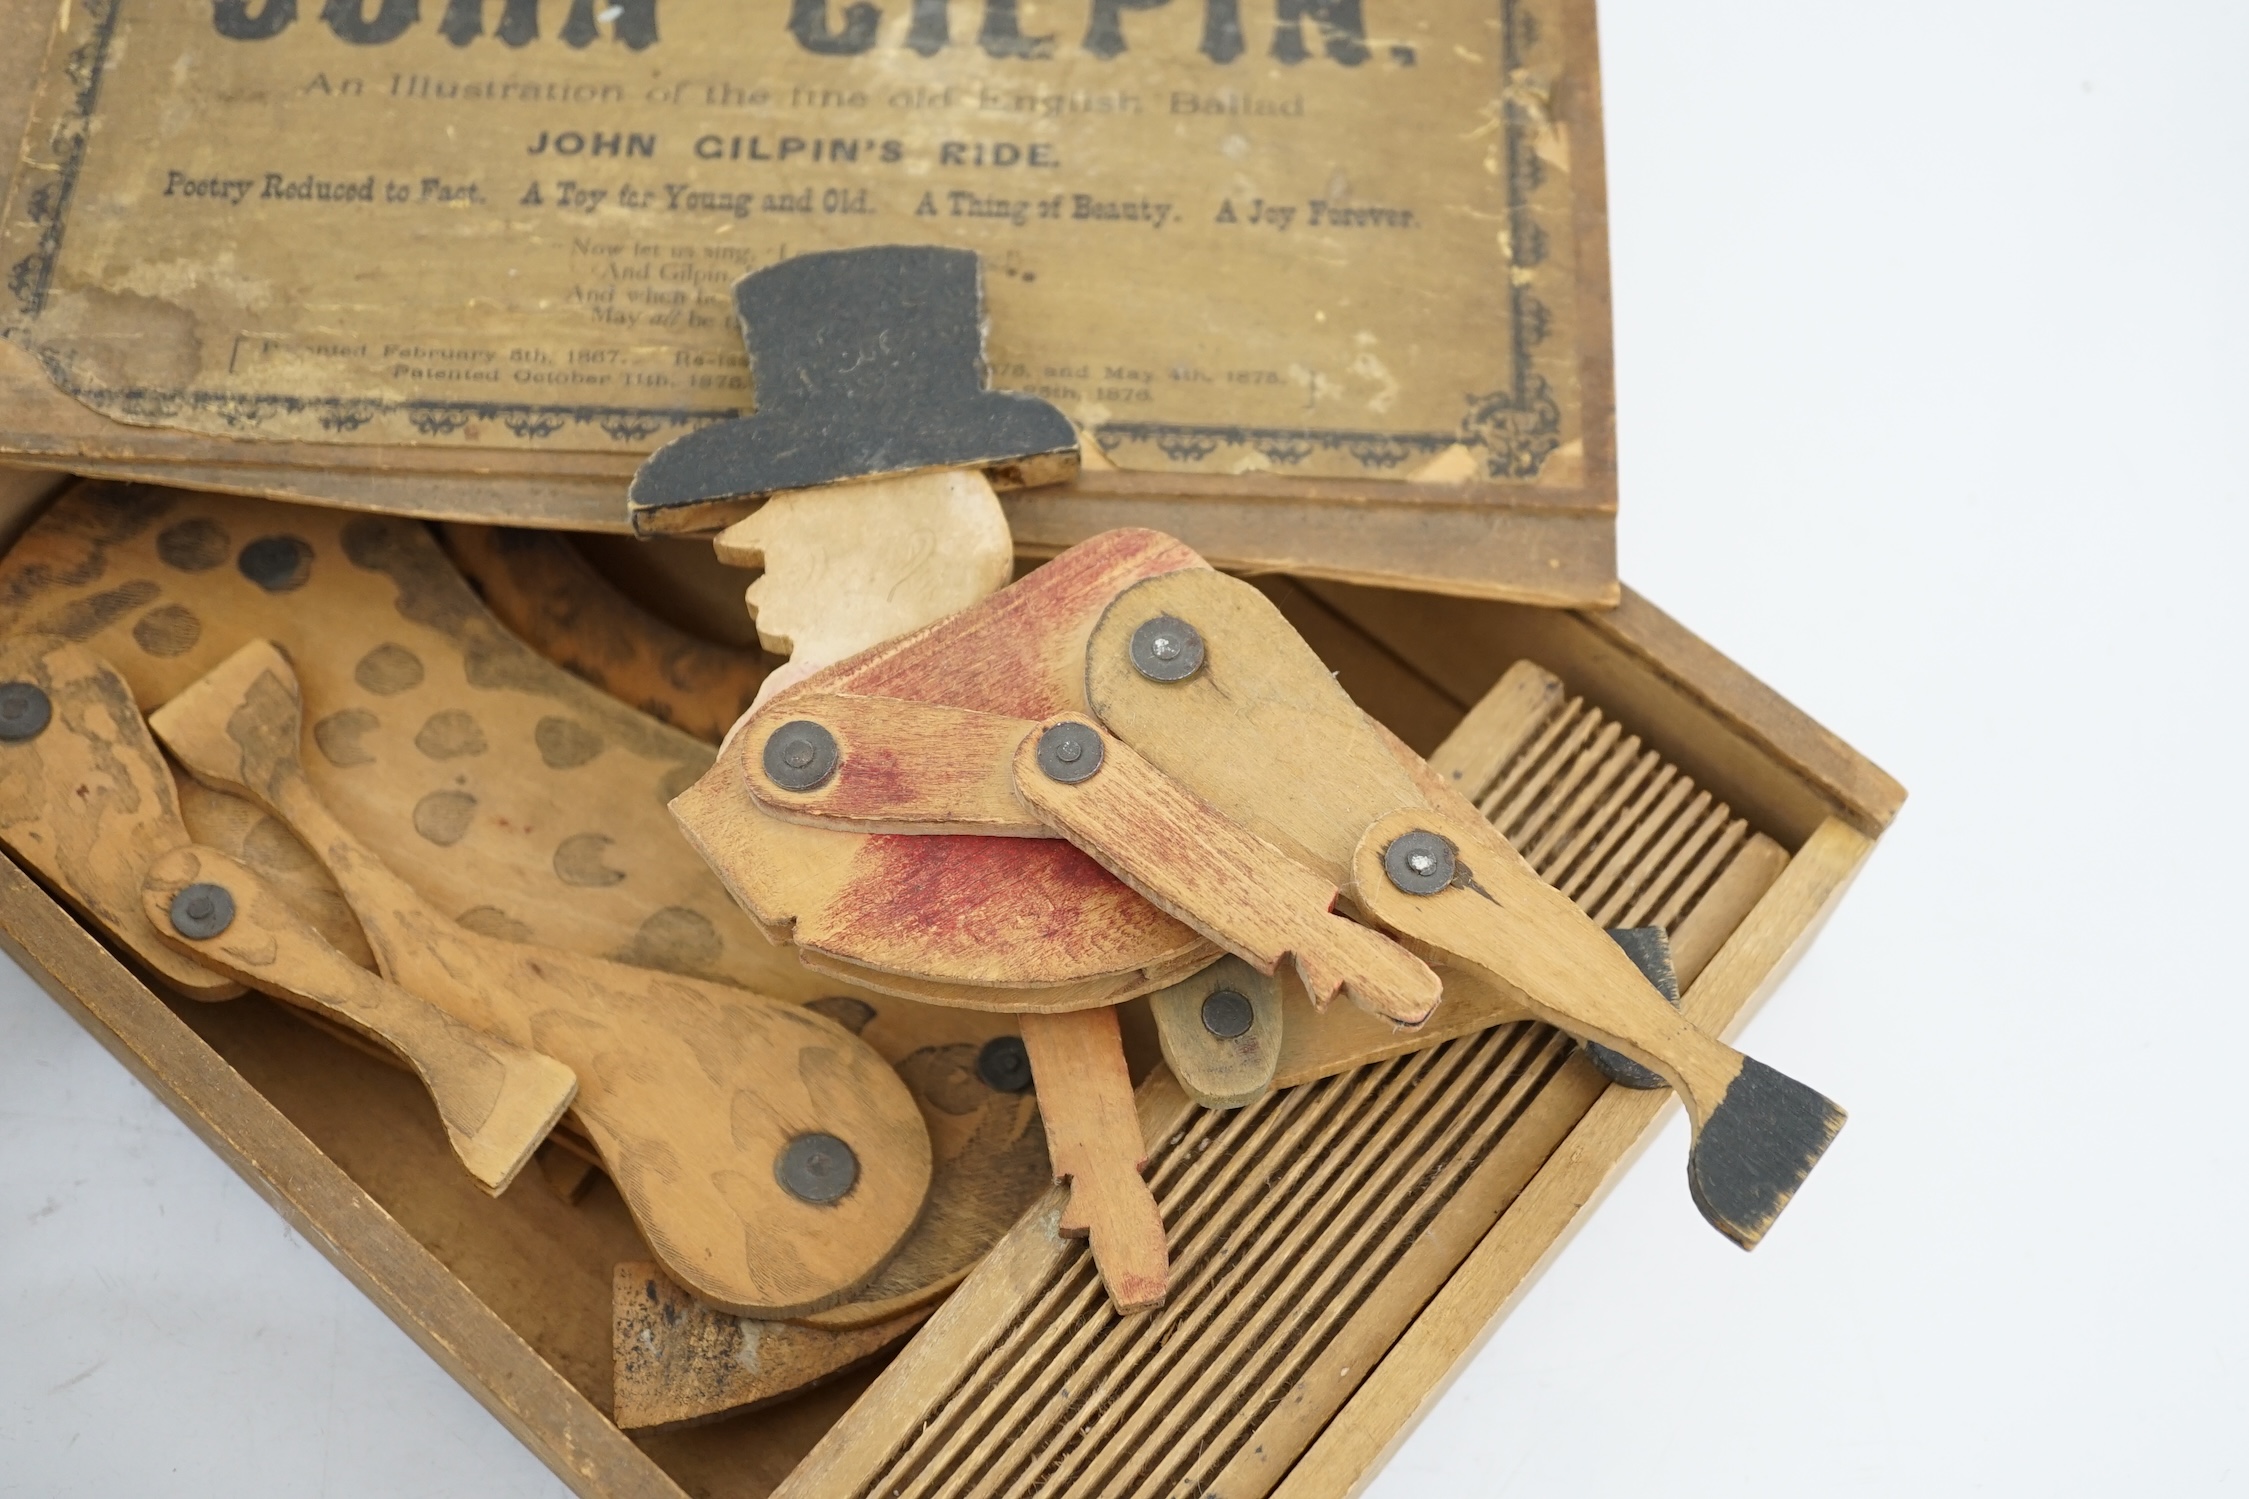 Grandall’s John Gilphin’s toy c.1876, with paperwork and original box, horse and rider and three - Image 3 of 7